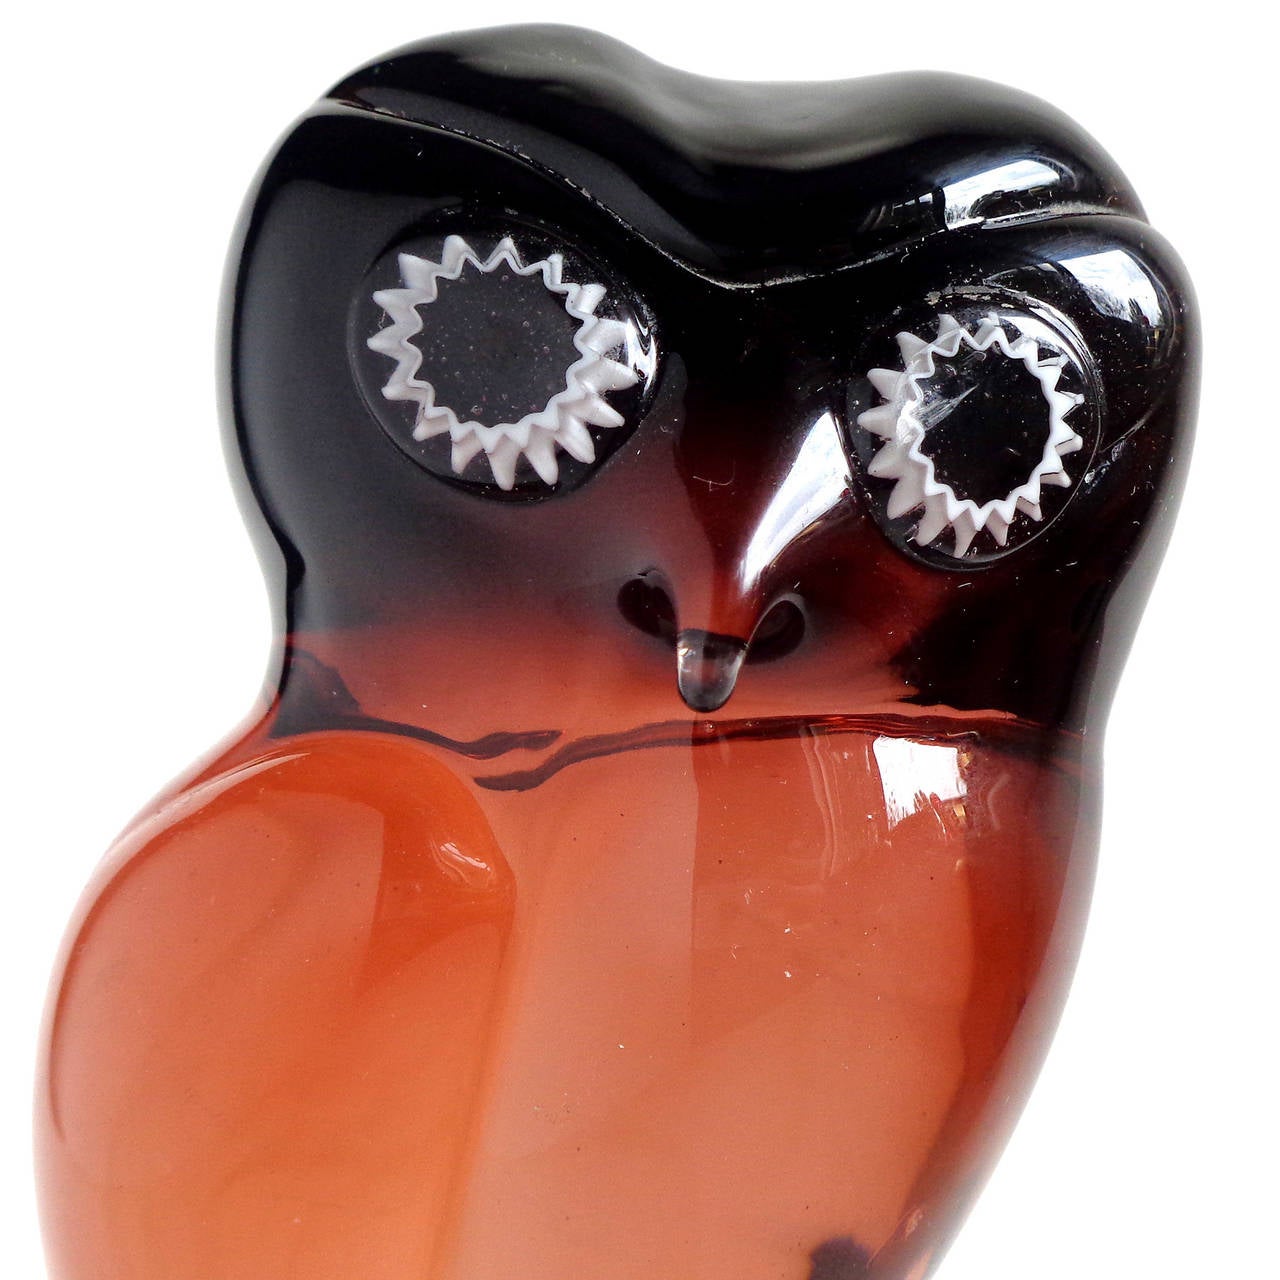 Free shipping worldwide! See details below description.

(Price is per item) Lovely Murano handblown, Sommerso technique, art glass owl sculptures. Documented to the Salviati company. Each of them has white murrines for the eyes, and Stand on